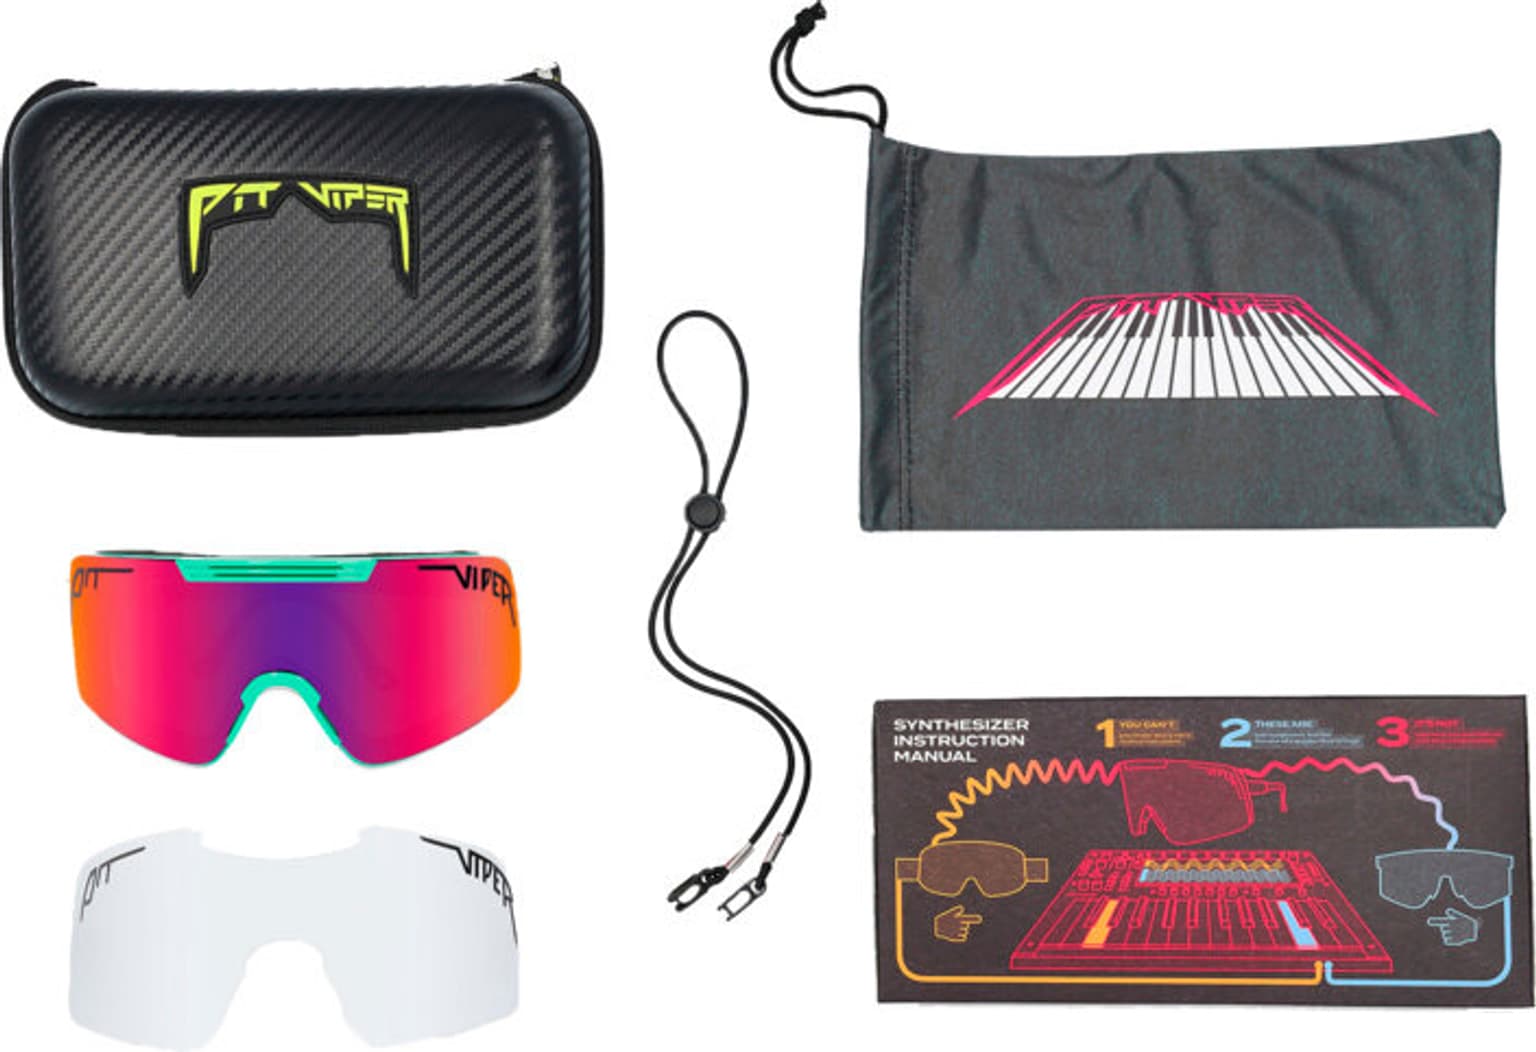 Pit Viper Pit Viper The Synthesizer The Shabooms Lunettes de sport 3